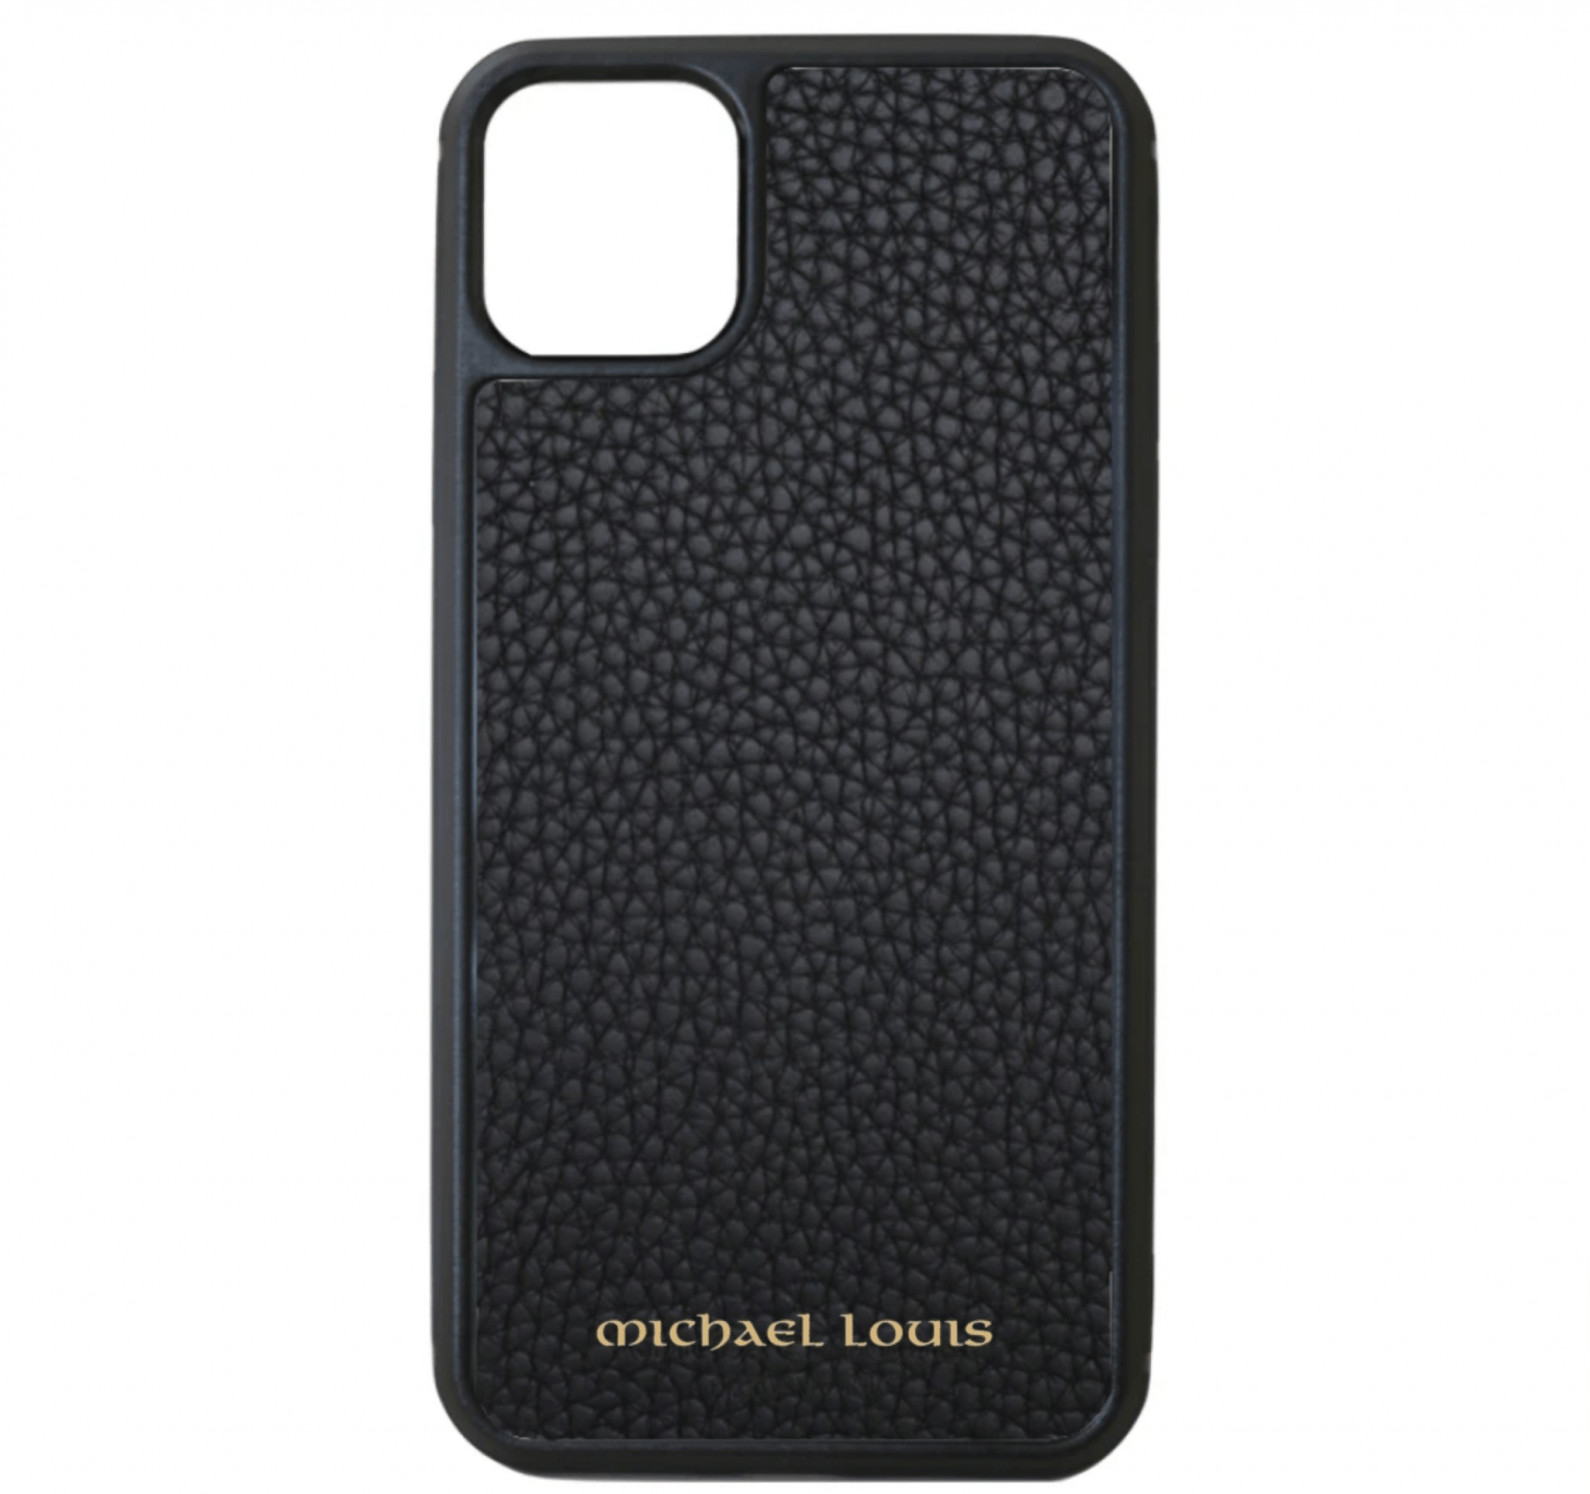 Review: Personalized Leather iPhone Cases from Michael Louis